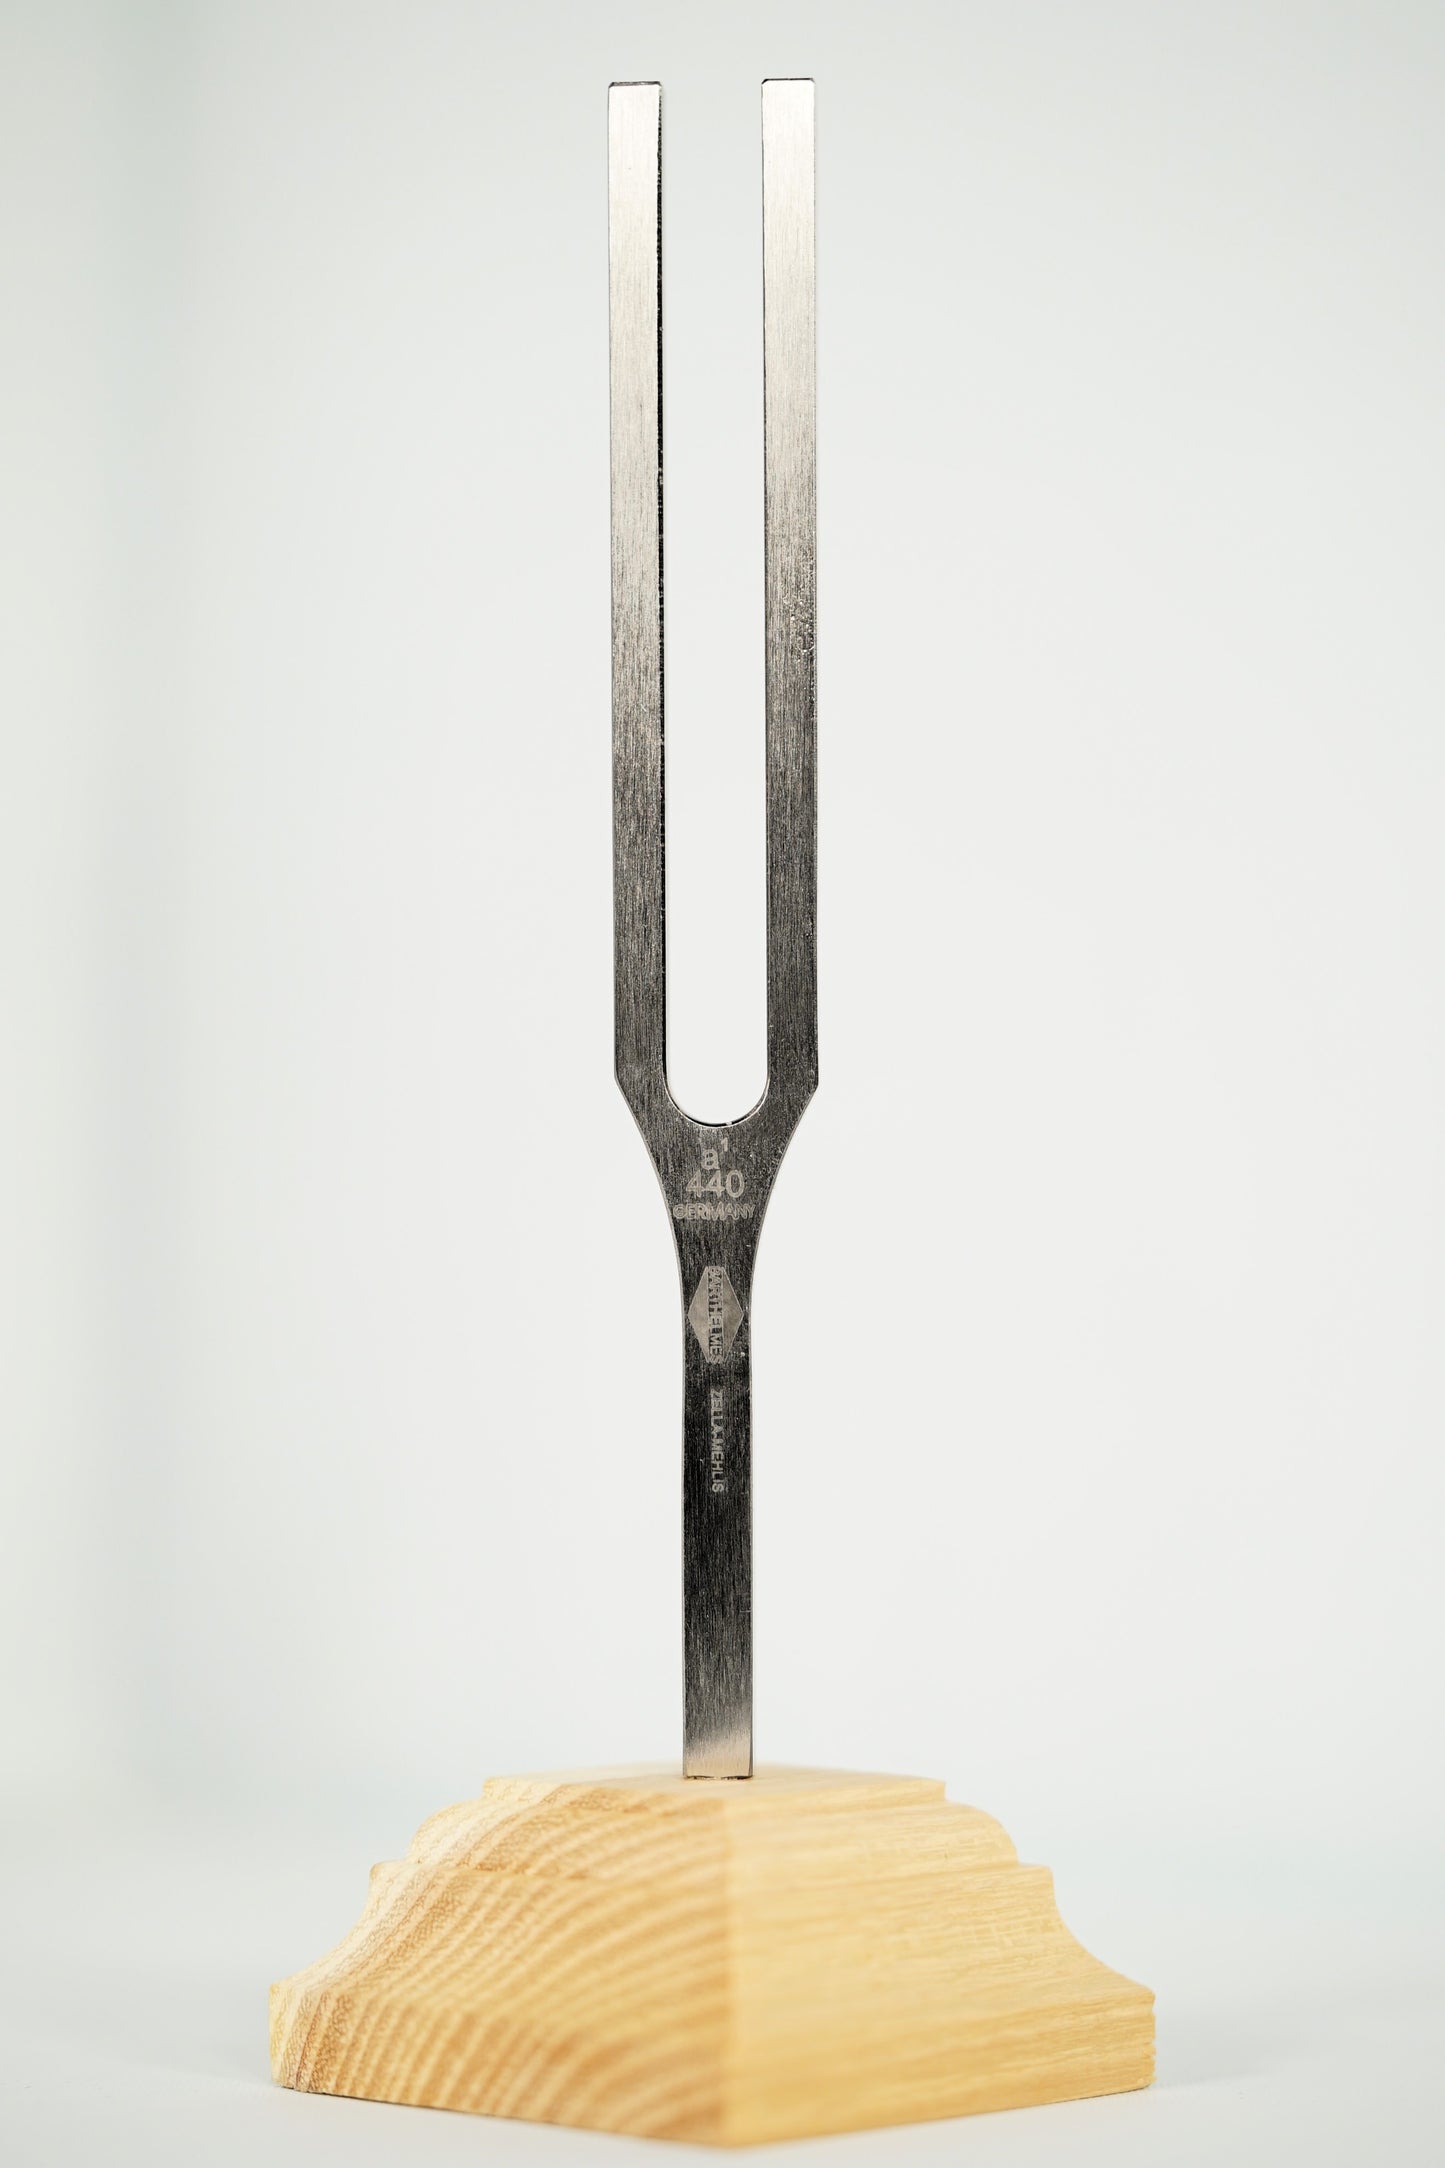 Barthelmes tuning fork a 440 Hz on a wooden base